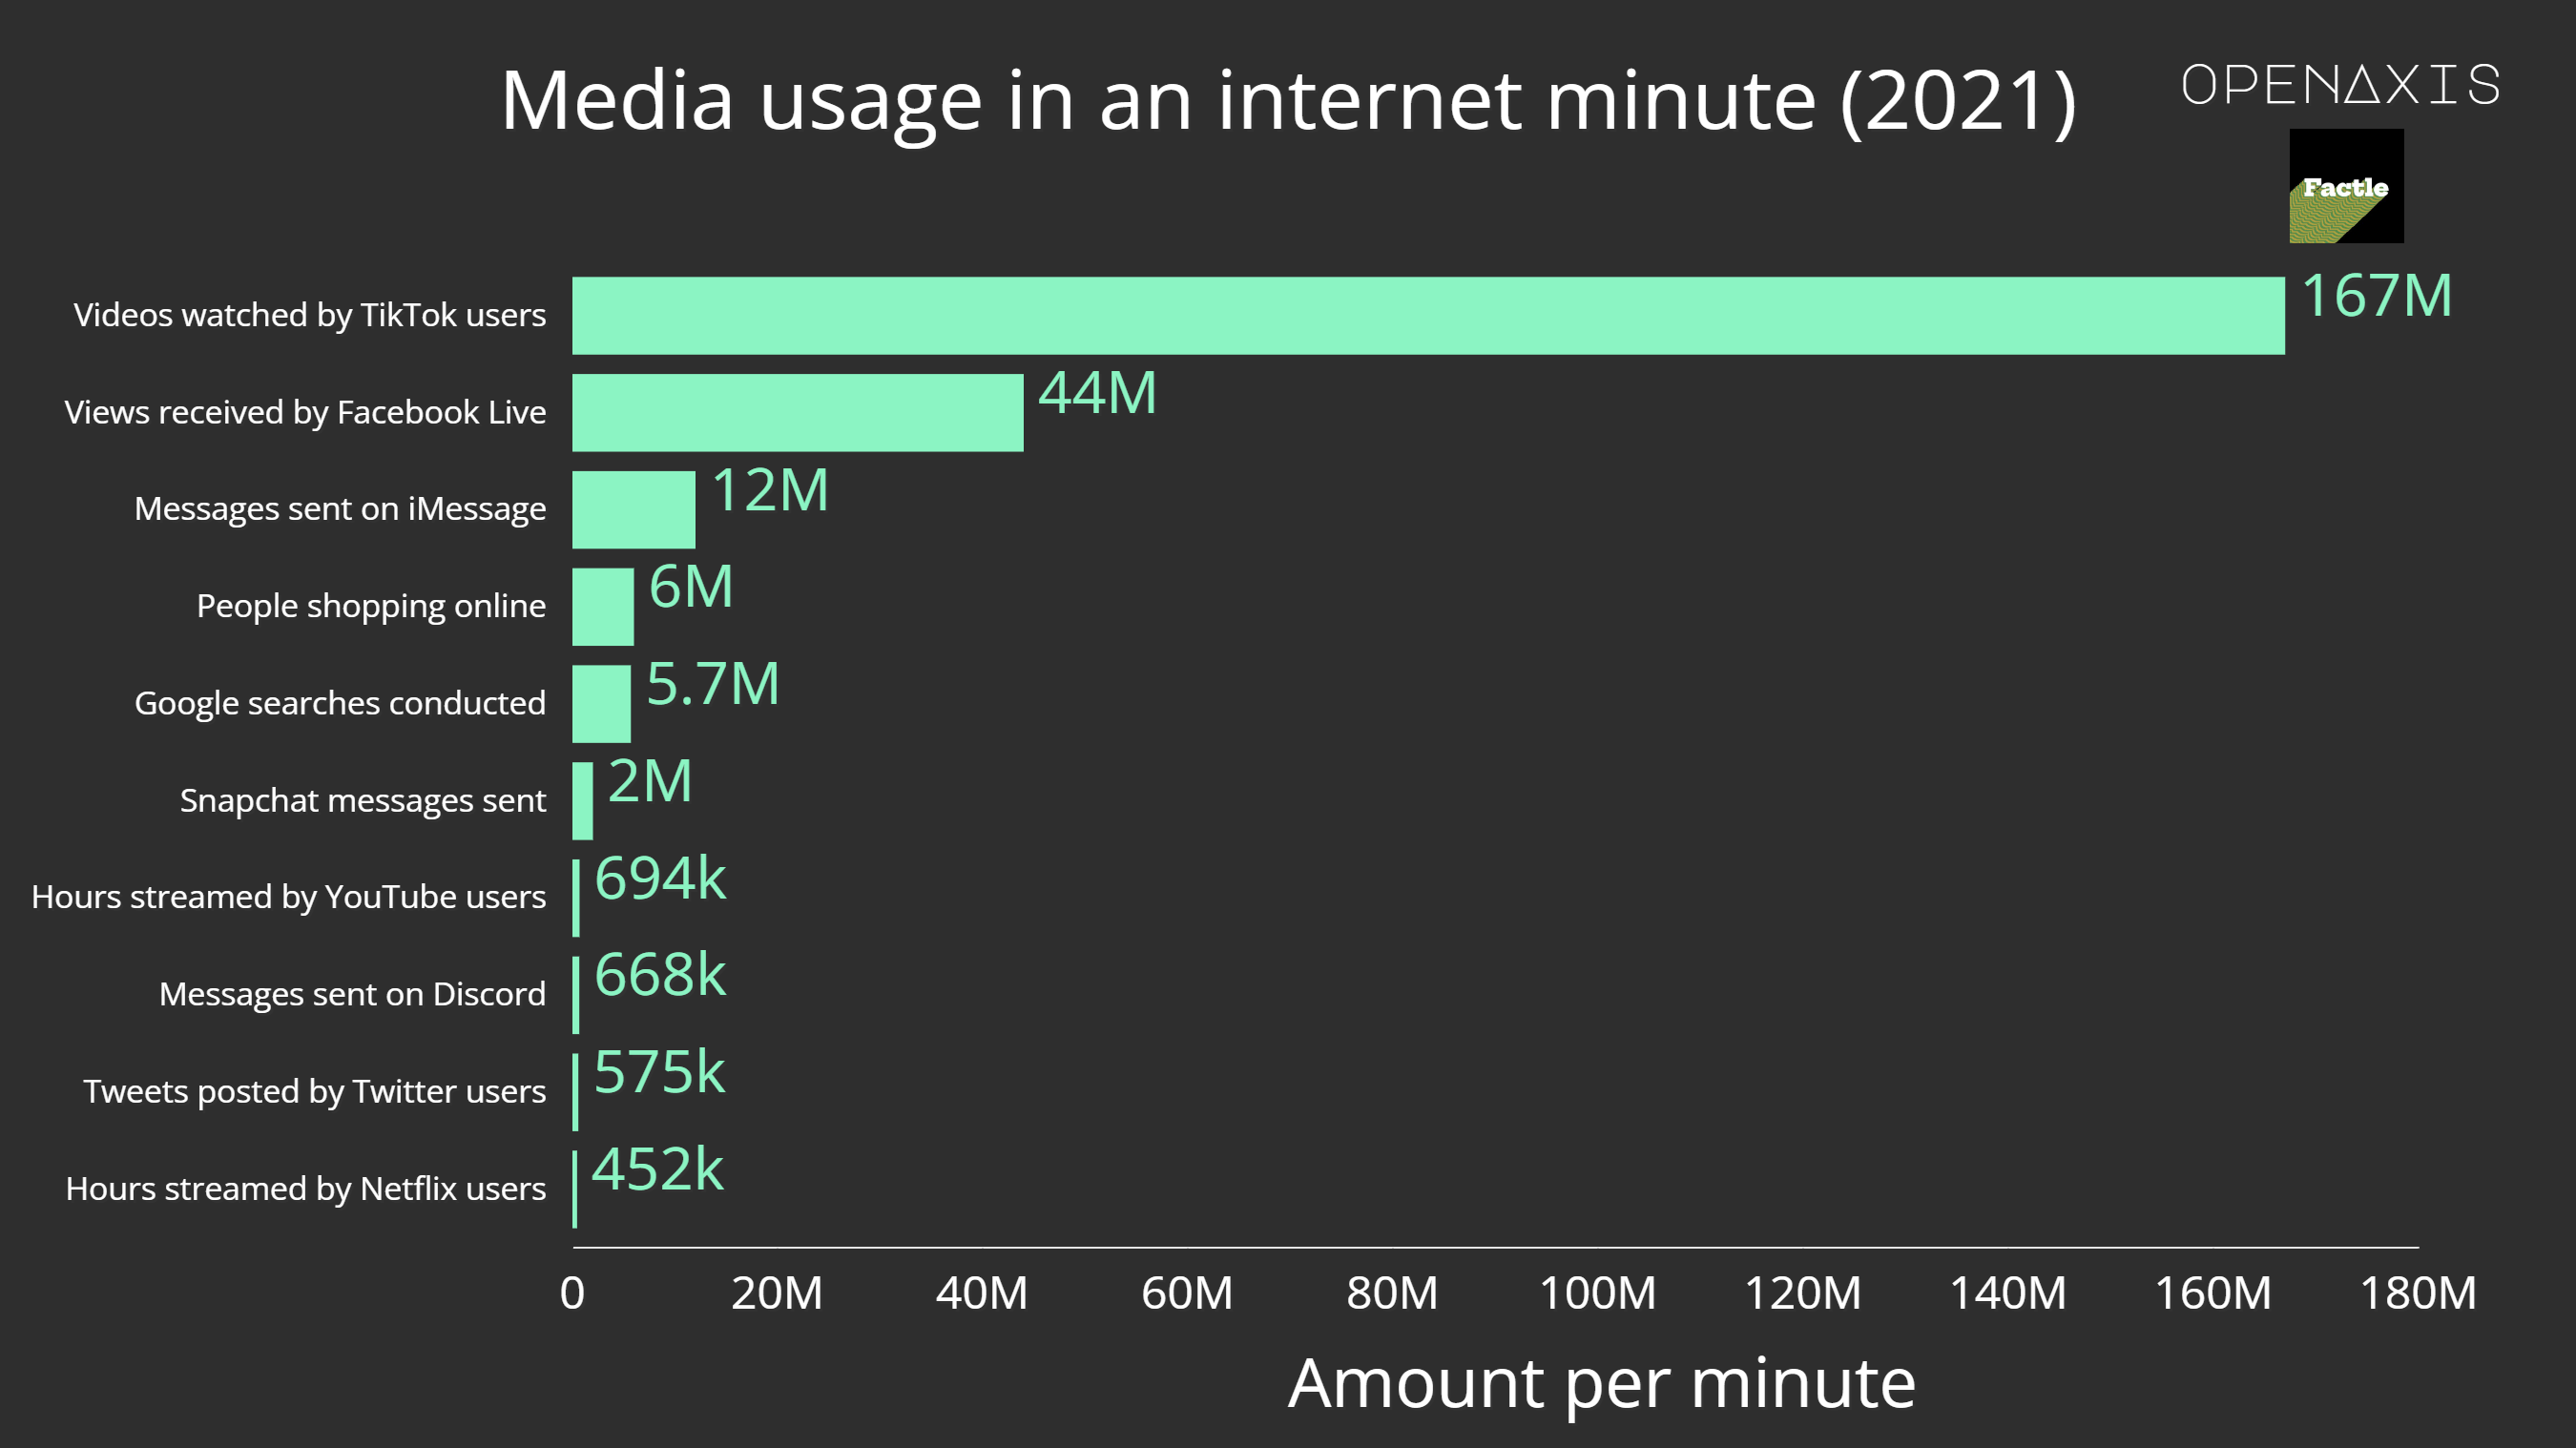 <p>A lot of things happen in an internet minute – millions of messages, e-mails and texts are sent, scrolled and uploaded, and hundreds of thousands of hours of content are consumed. In a 2021 internet minute, 452 thousand hours of Netflix content were streamed by users worldwide.</p><p><br /></p><p><span data-index="0" data-denotation-char data-id="0" data-value="&lt;a href=&quot;/search?q=%23socialmedia&quot; target=_self&gt;#socialmedia" data-link="/search?q=%23socialmedia">﻿<span contenteditable="false"><span></span><a href="/search?q=%23socialmedia" target="_self">#socialmedia</a></span>﻿</span> <span data-index="0" data-denotation-char data-id="0" data-value="&lt;a href=&quot;/search?q=%23online&quot; target=_self&gt;#online" data-link="/search?q=%23online">﻿<span contenteditable="false"><span></span><a href="/search?q=%23online" target="_self">#online</a></span>﻿</span> </p><p><br /></p><p>Source: <a href="/data/3773" target="_blank">Statista Research Department</a></p><p><br /></p>